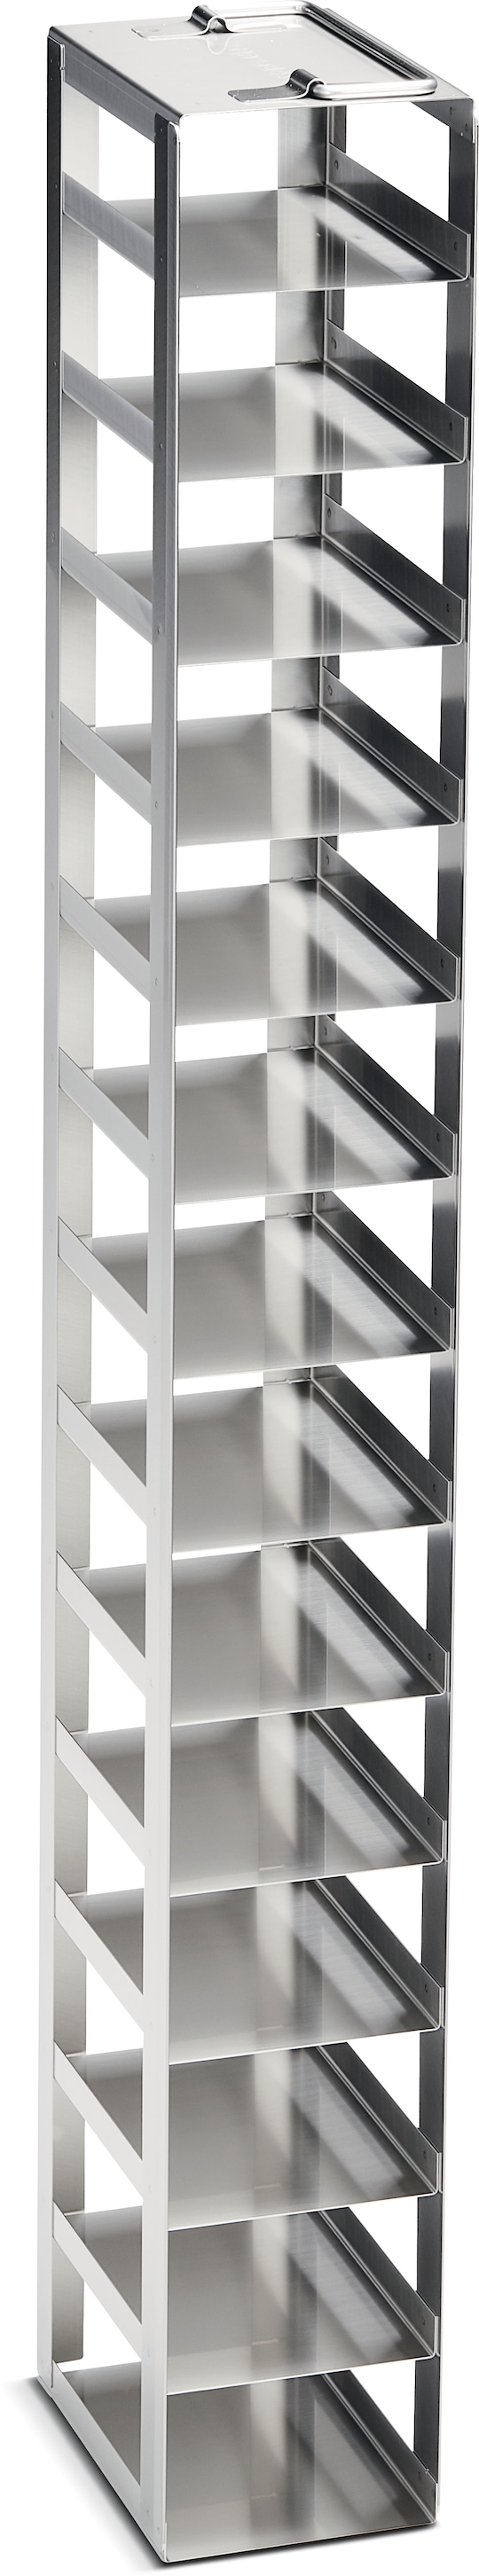 Metal tower rack for DWP in Eppendorf CryoCube® ULT chest freezer - (6001040110)